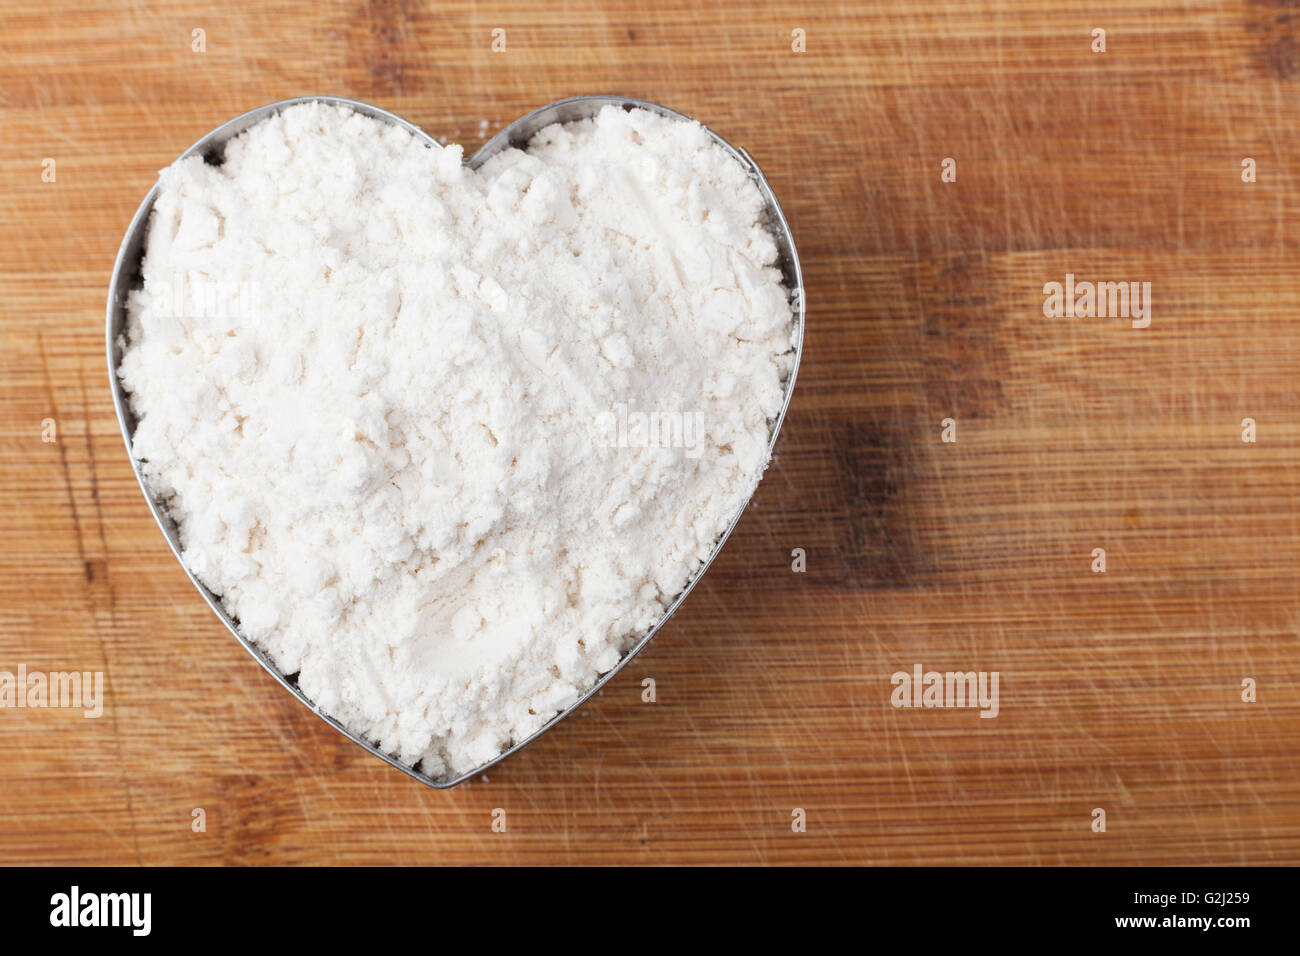 Flour shape heart in a mold on brown wood cutting board Stock Photo